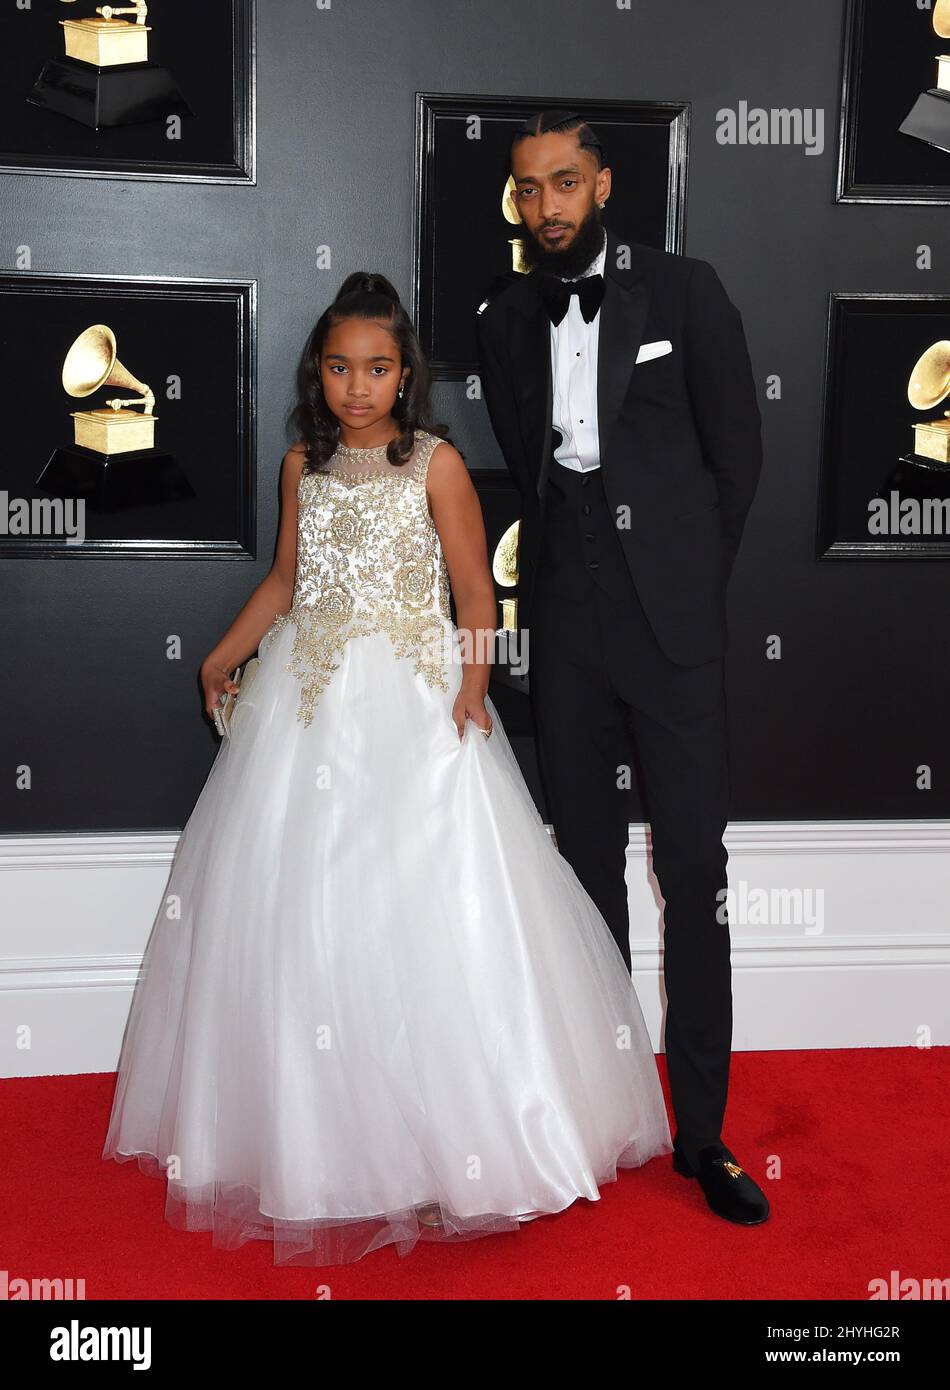 Nipsey Hussle and Emani Asghedom at the 61st Annual Grammy Awards held at Staples Center on February 10, 2019 in Los Angeles, CA. Stock Photo